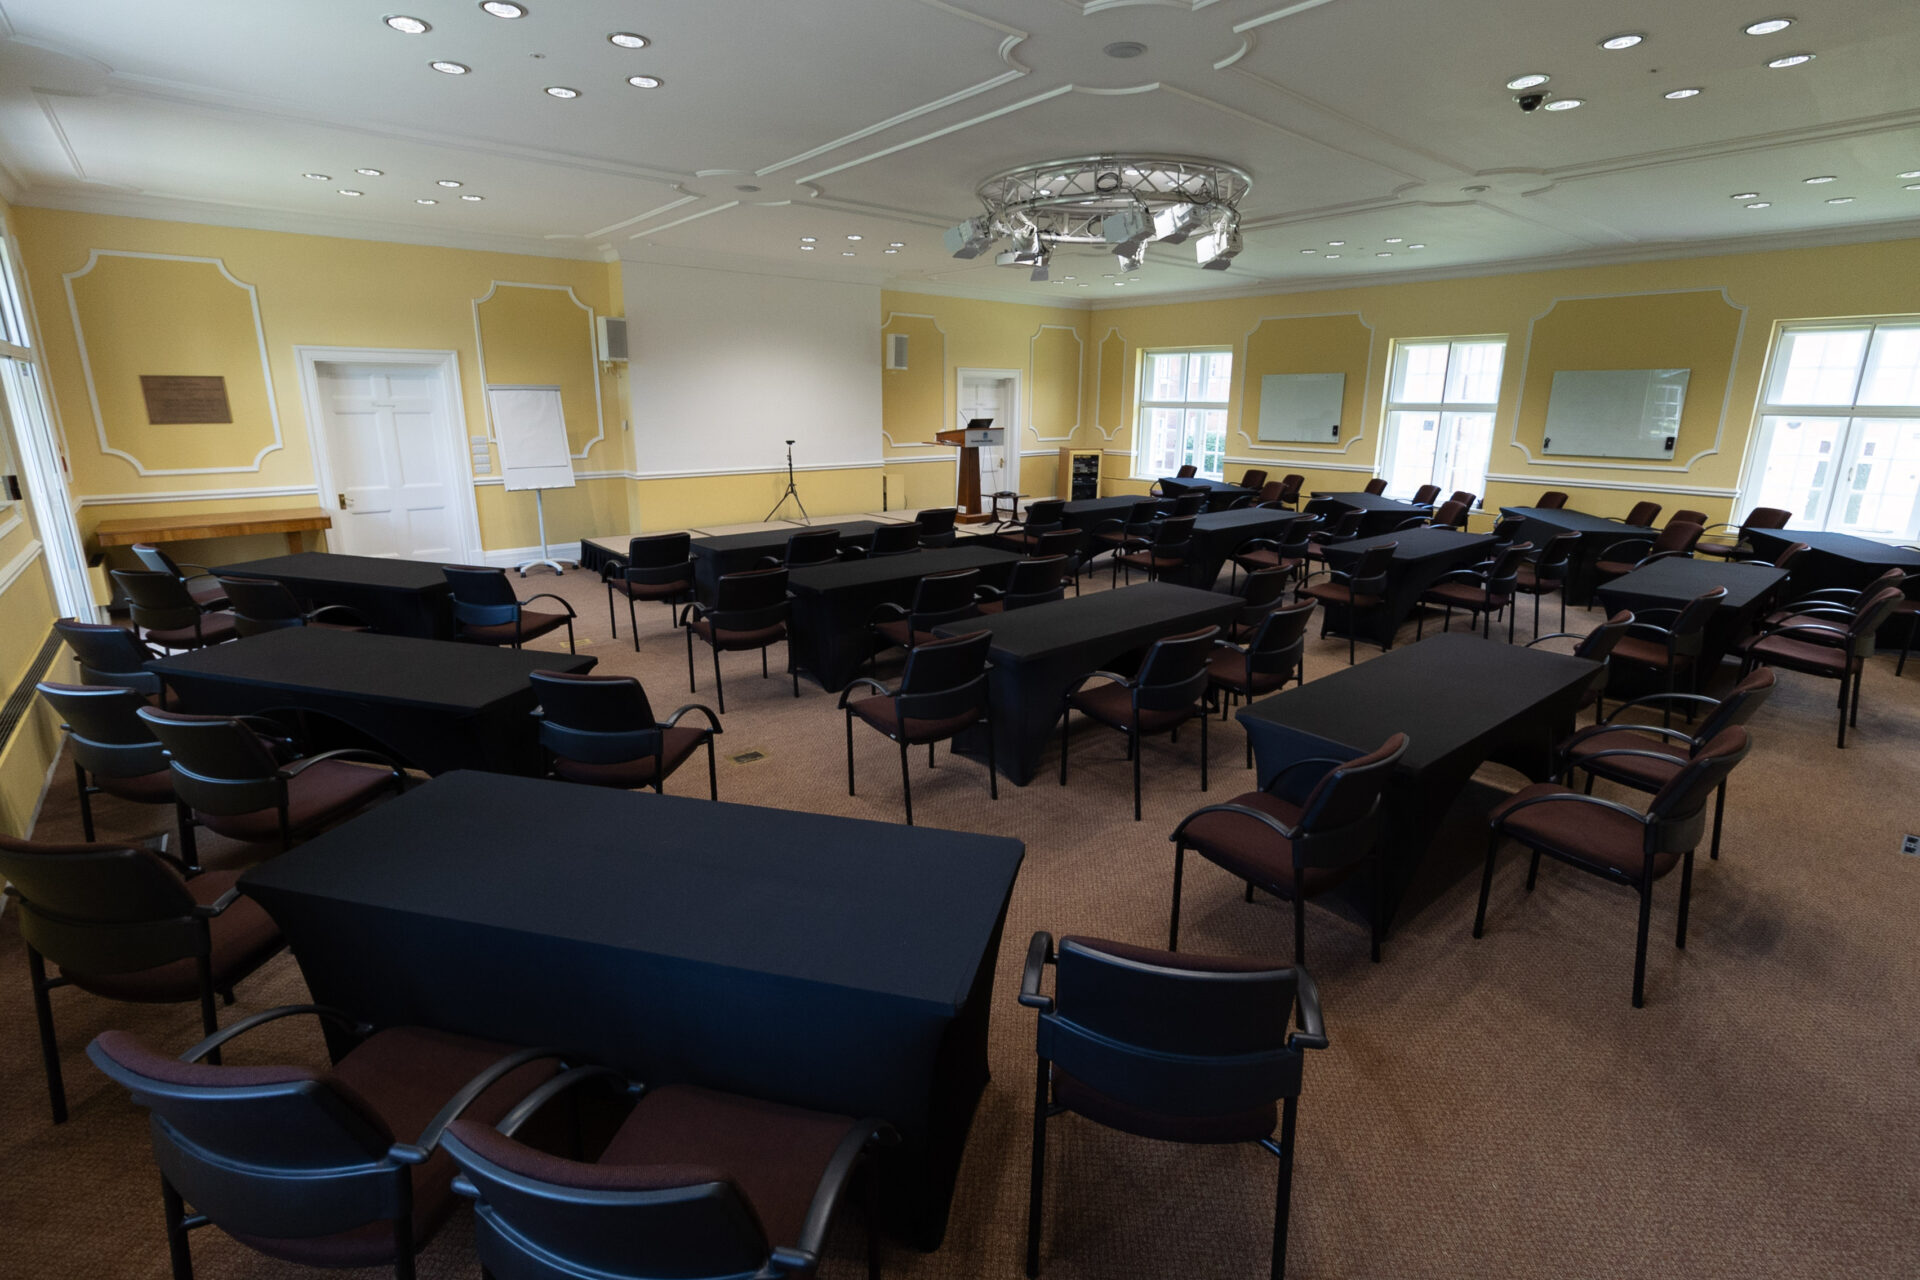 The Flitcroft conference room, set up to accommodate up to 60 students in a classroom layout.